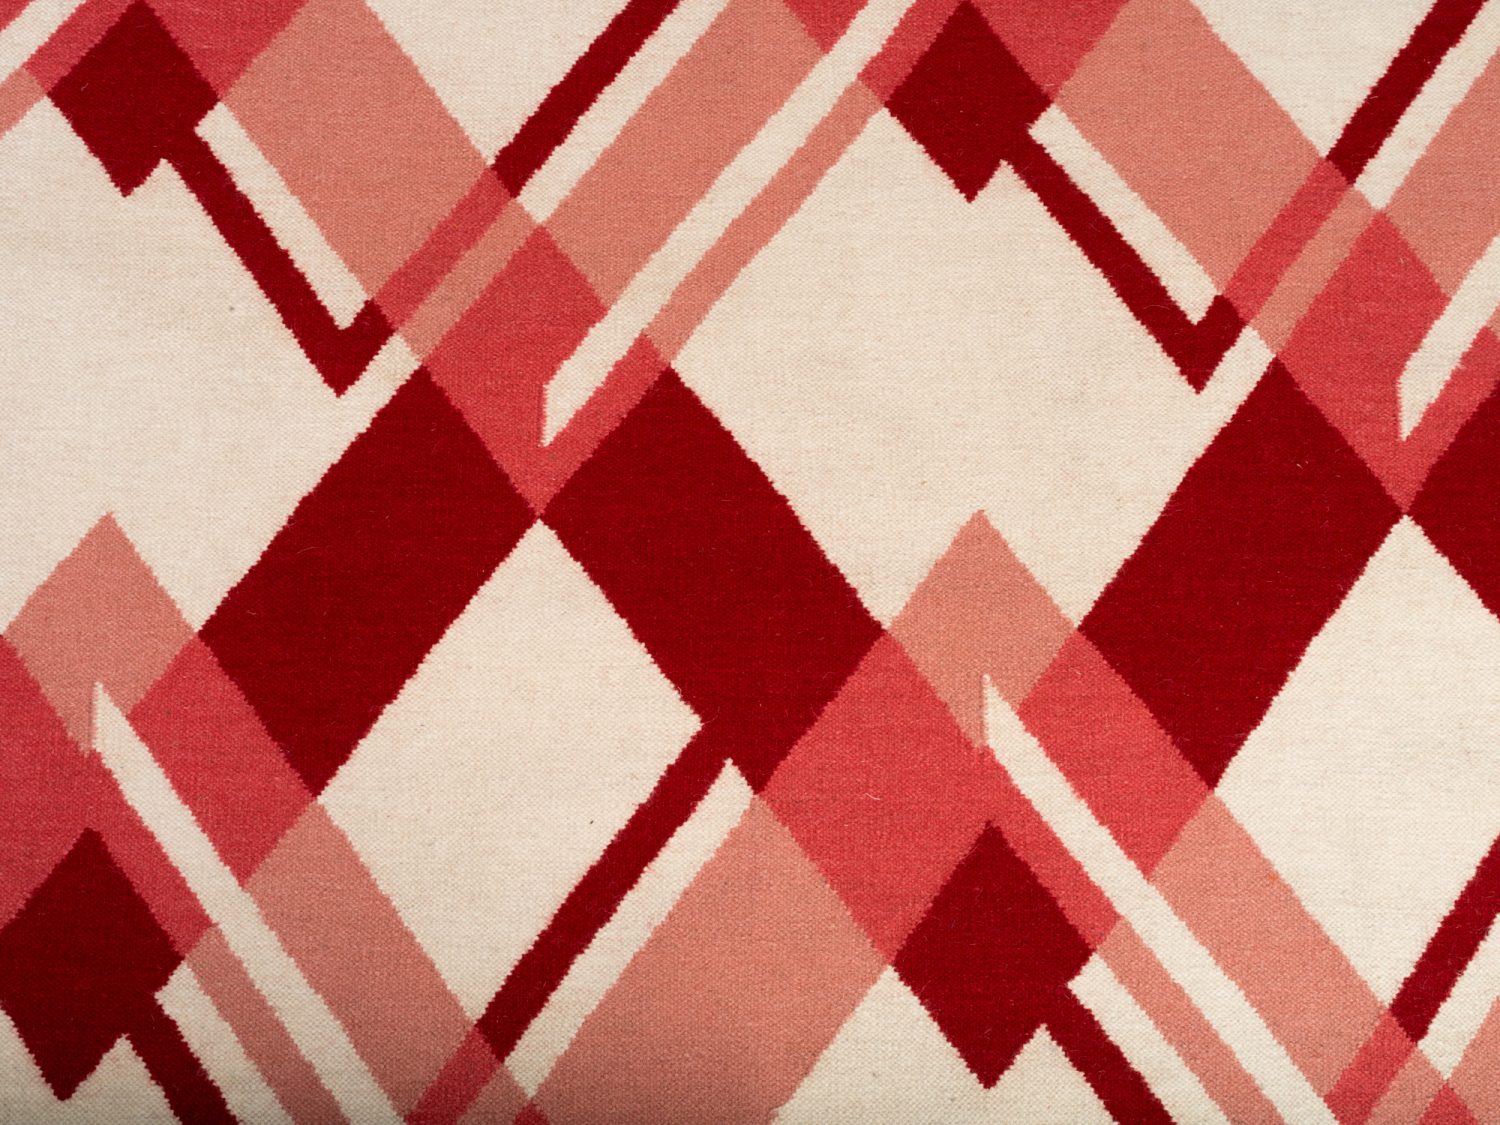 A design from leading Scottish textile designer, Laura Spring, inspired by the Bombay Sample Book